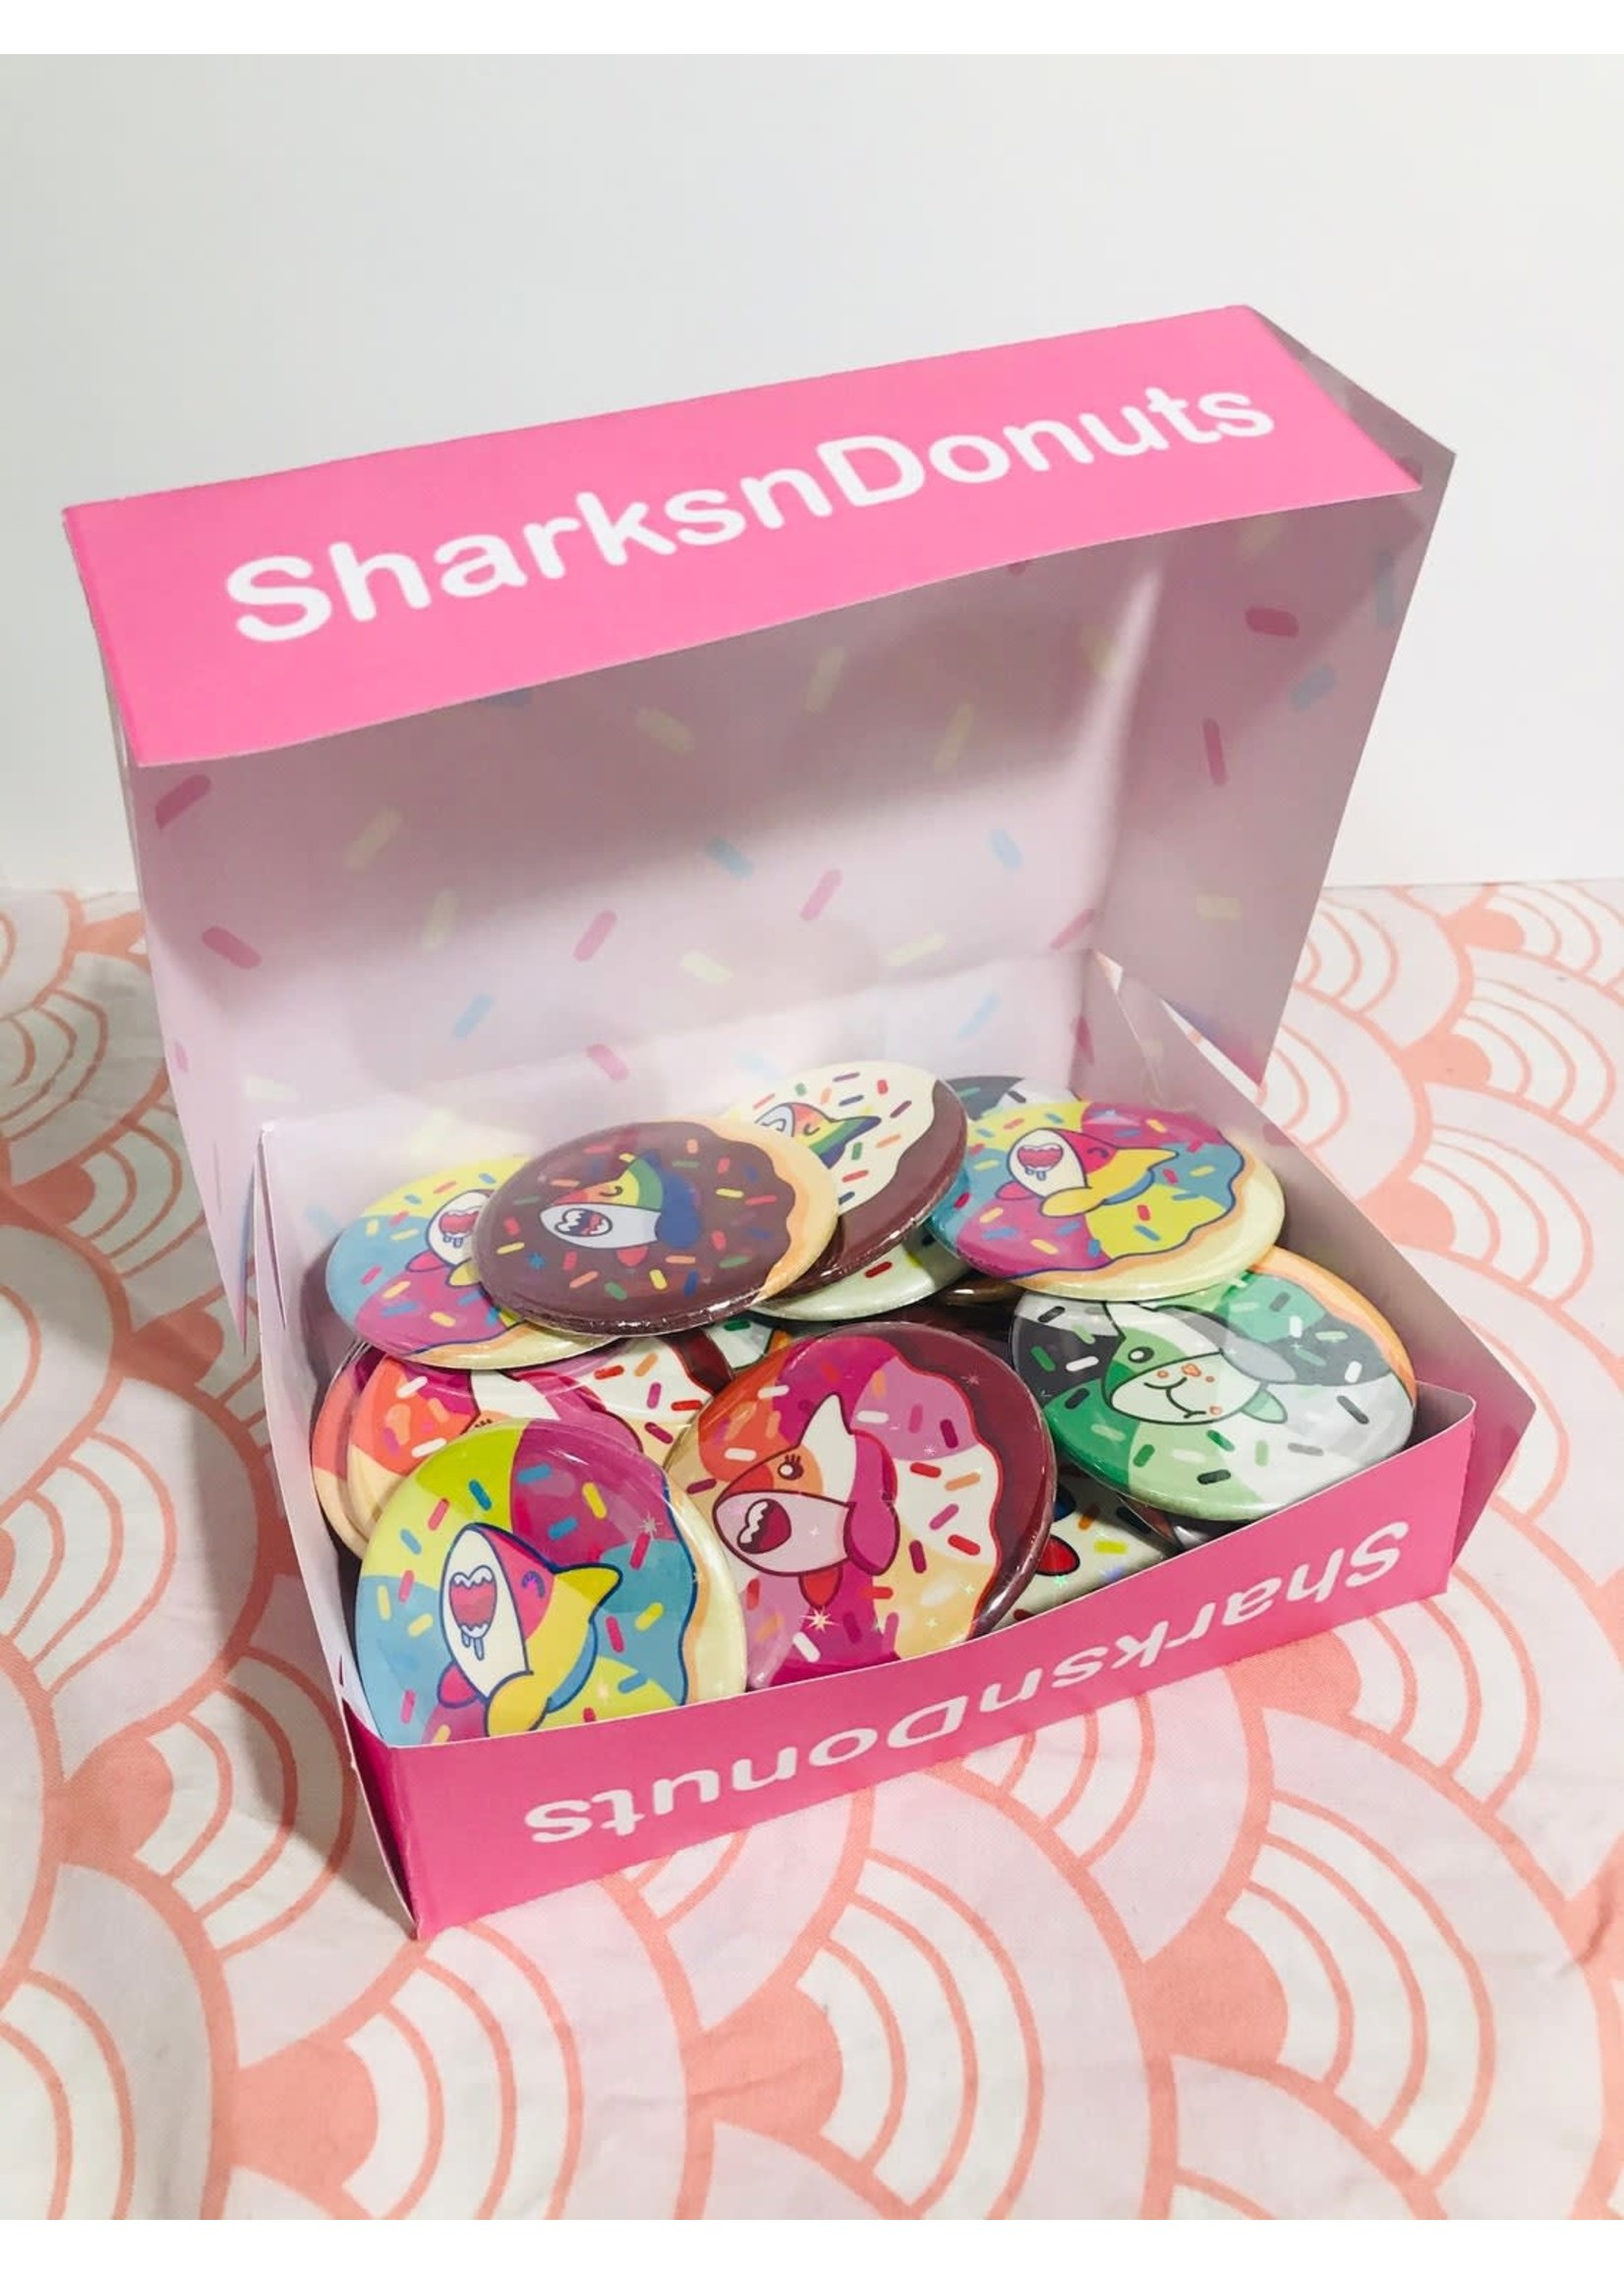 SHARKNDONUTS Pride Sharks and Donut Buttons Lesbian